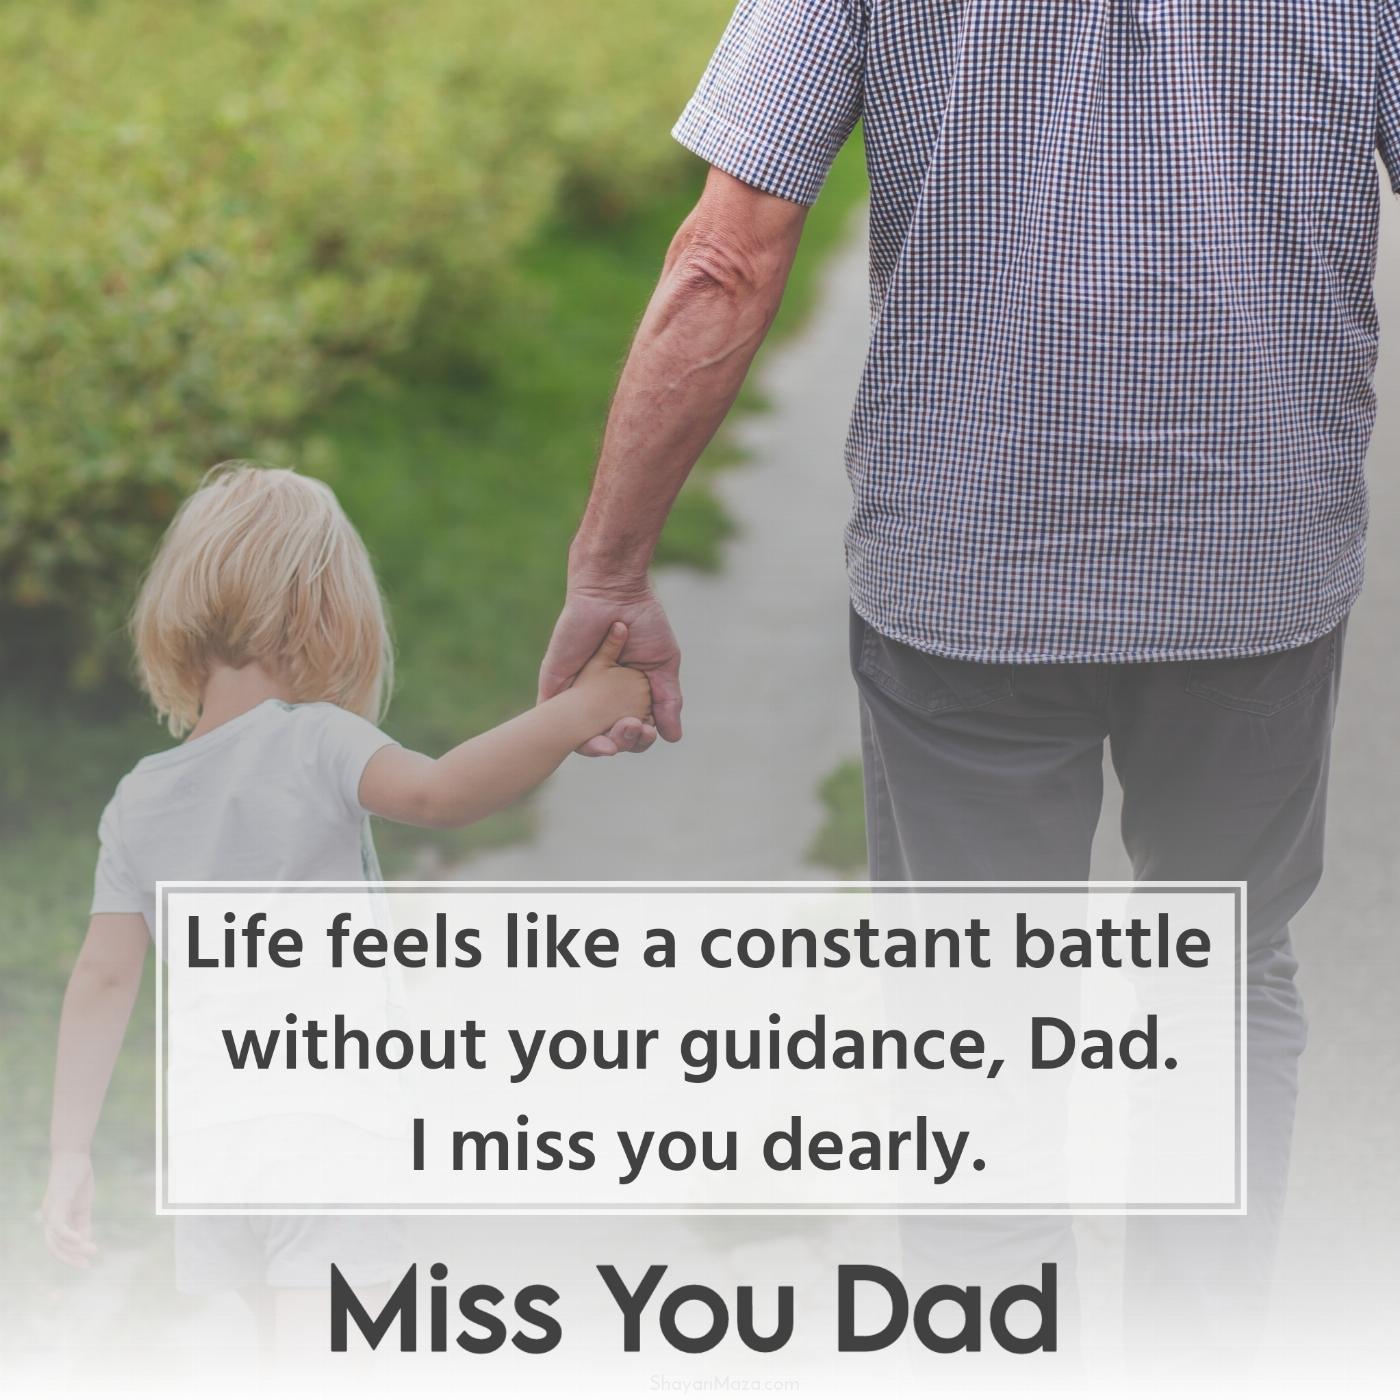 Life feels like a constant battle without your guidance Dad